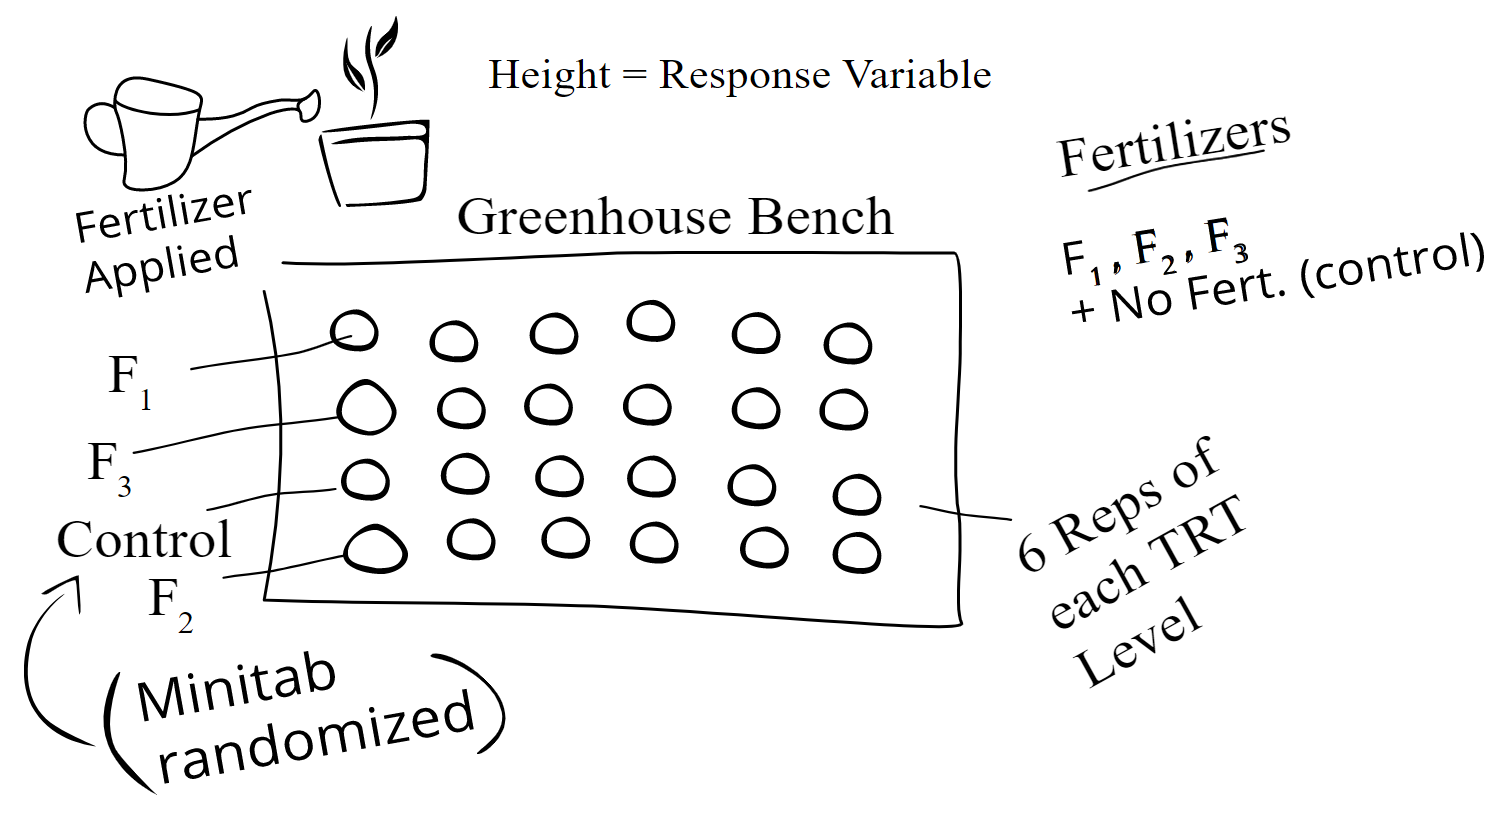 Diagram showing a greenhouse bench holding 4 rows of 6 samples each. Each sample is randomly assigned to one of the 4 treatment levels, with 6 samples in each treatment level. Height is identified as the response variable.